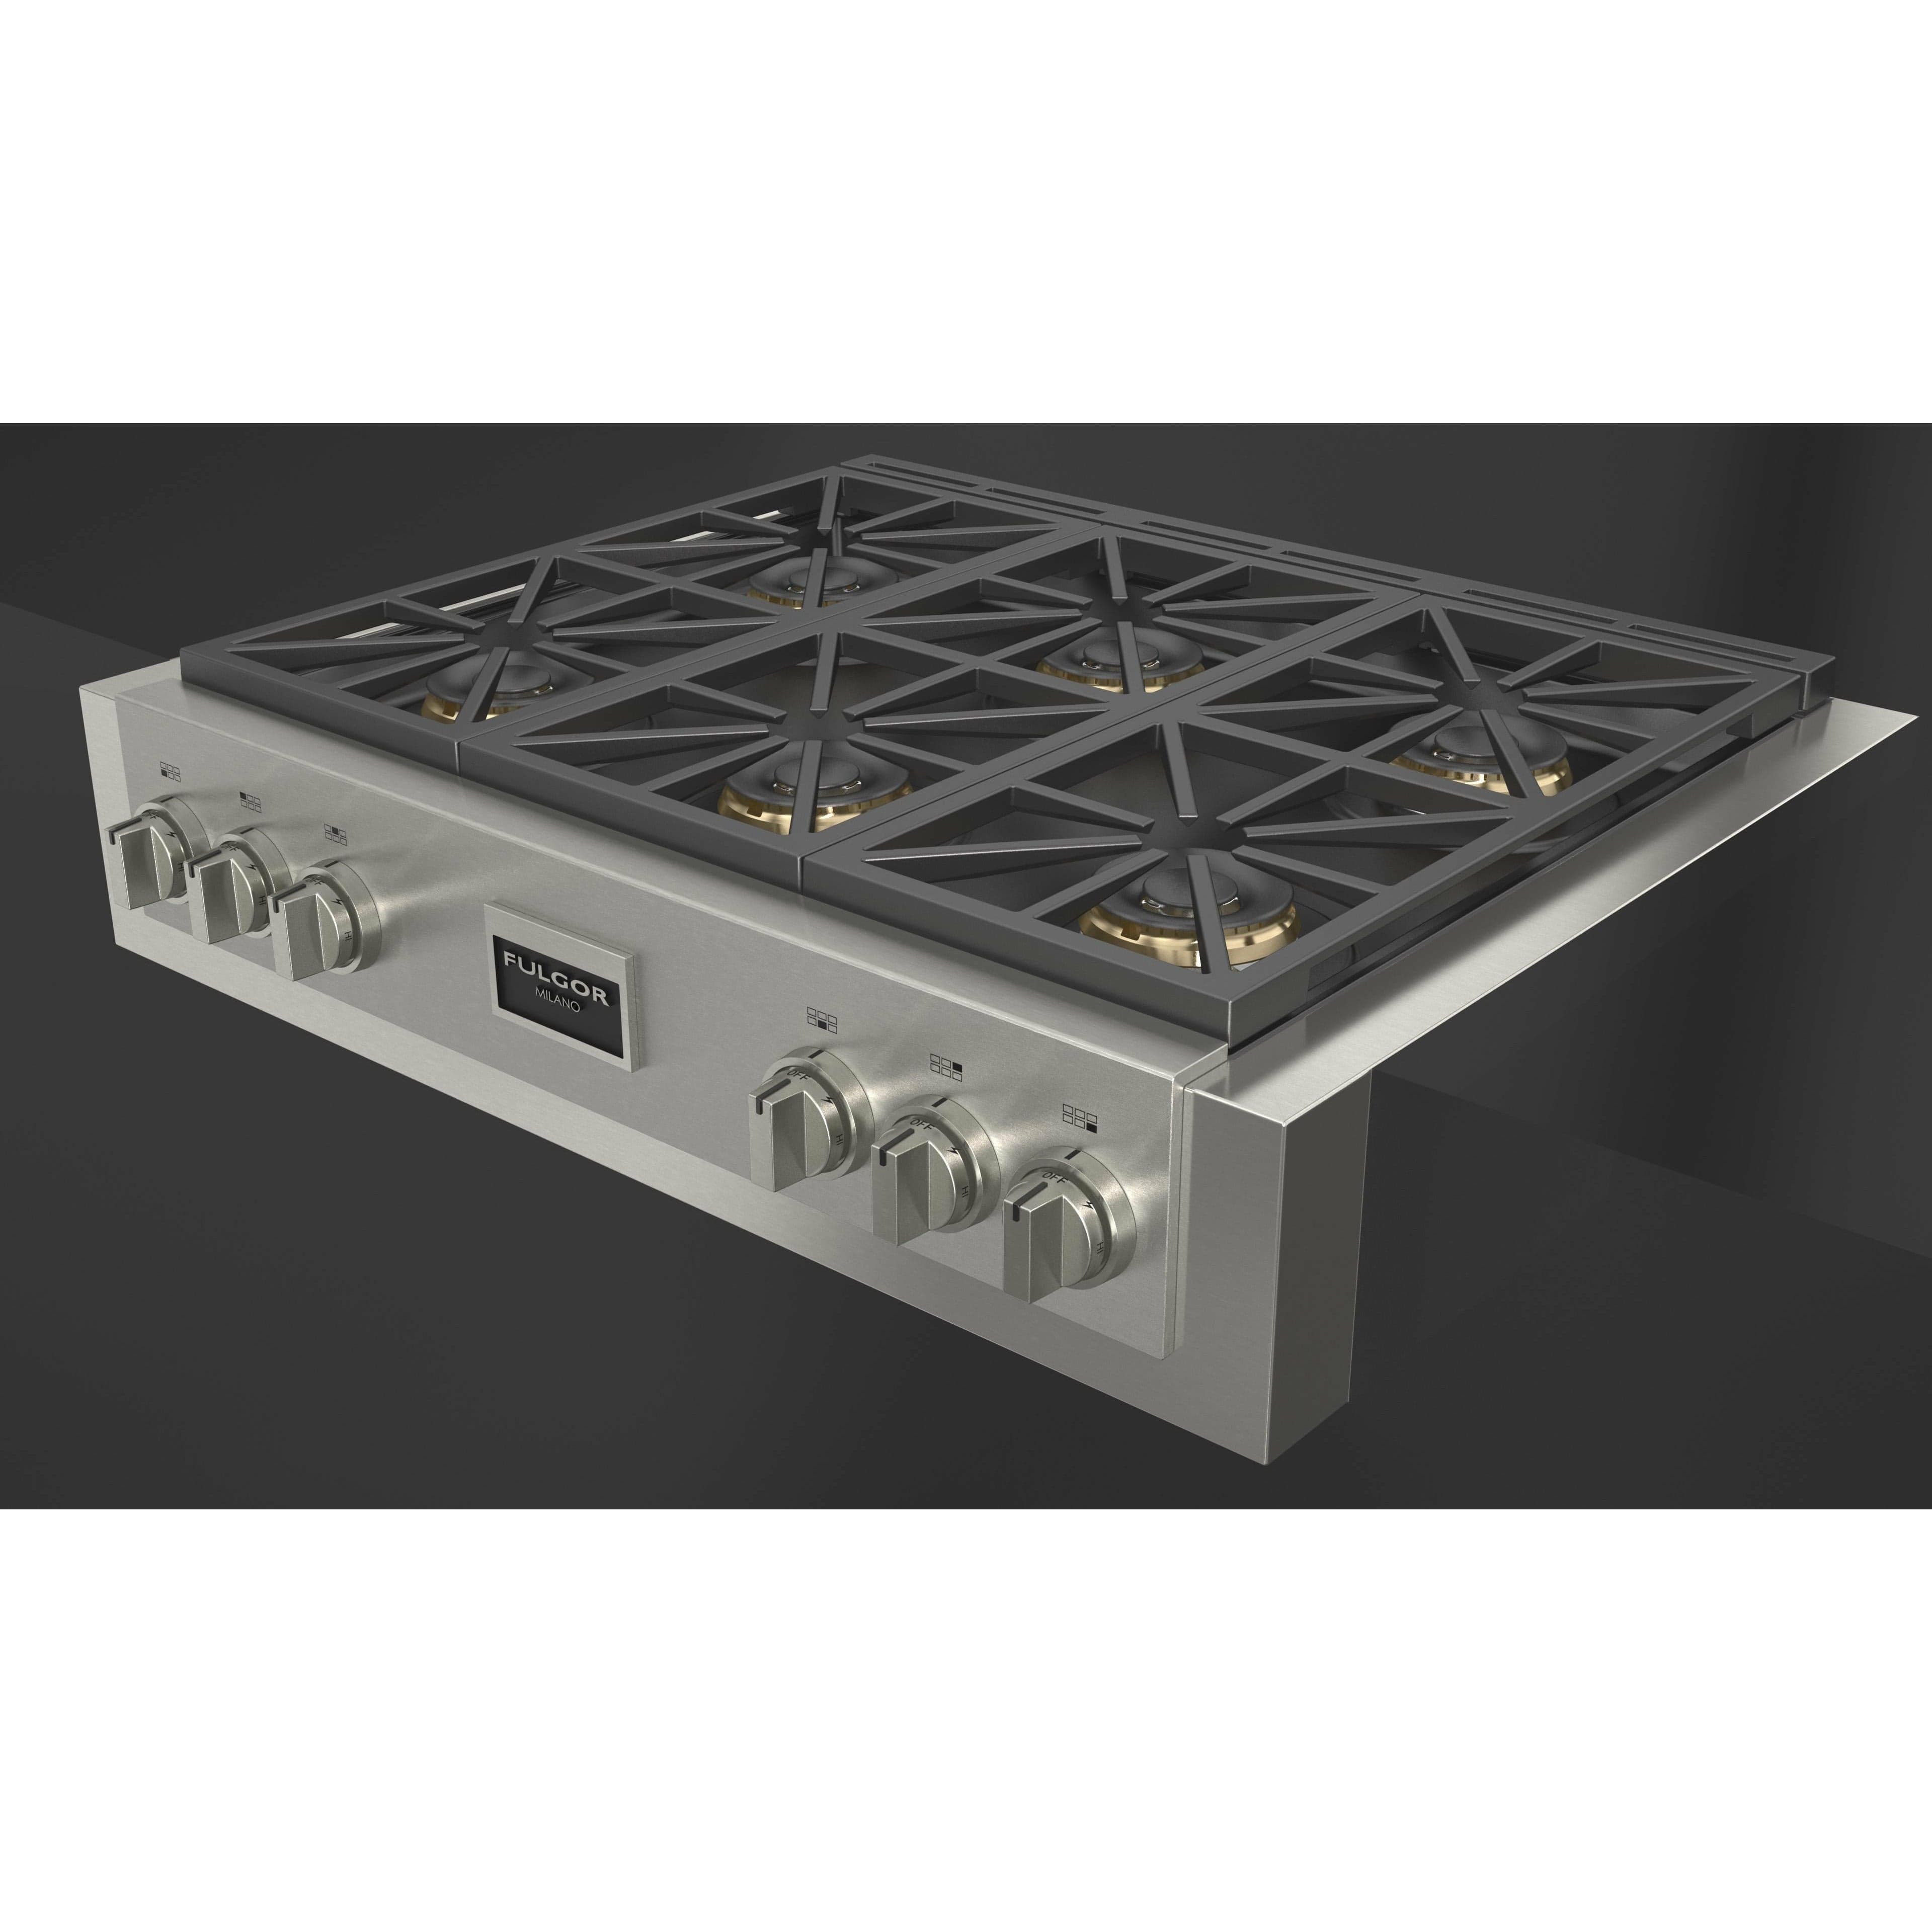 Fulgor Milano 36" Gas Rangetop with 6 Sealed Dual Flame 18,000 BTU Burners, Stainless Steel - F6GRT366S1 Rangetop F6GRT366S1 Luxury Appliances Direct